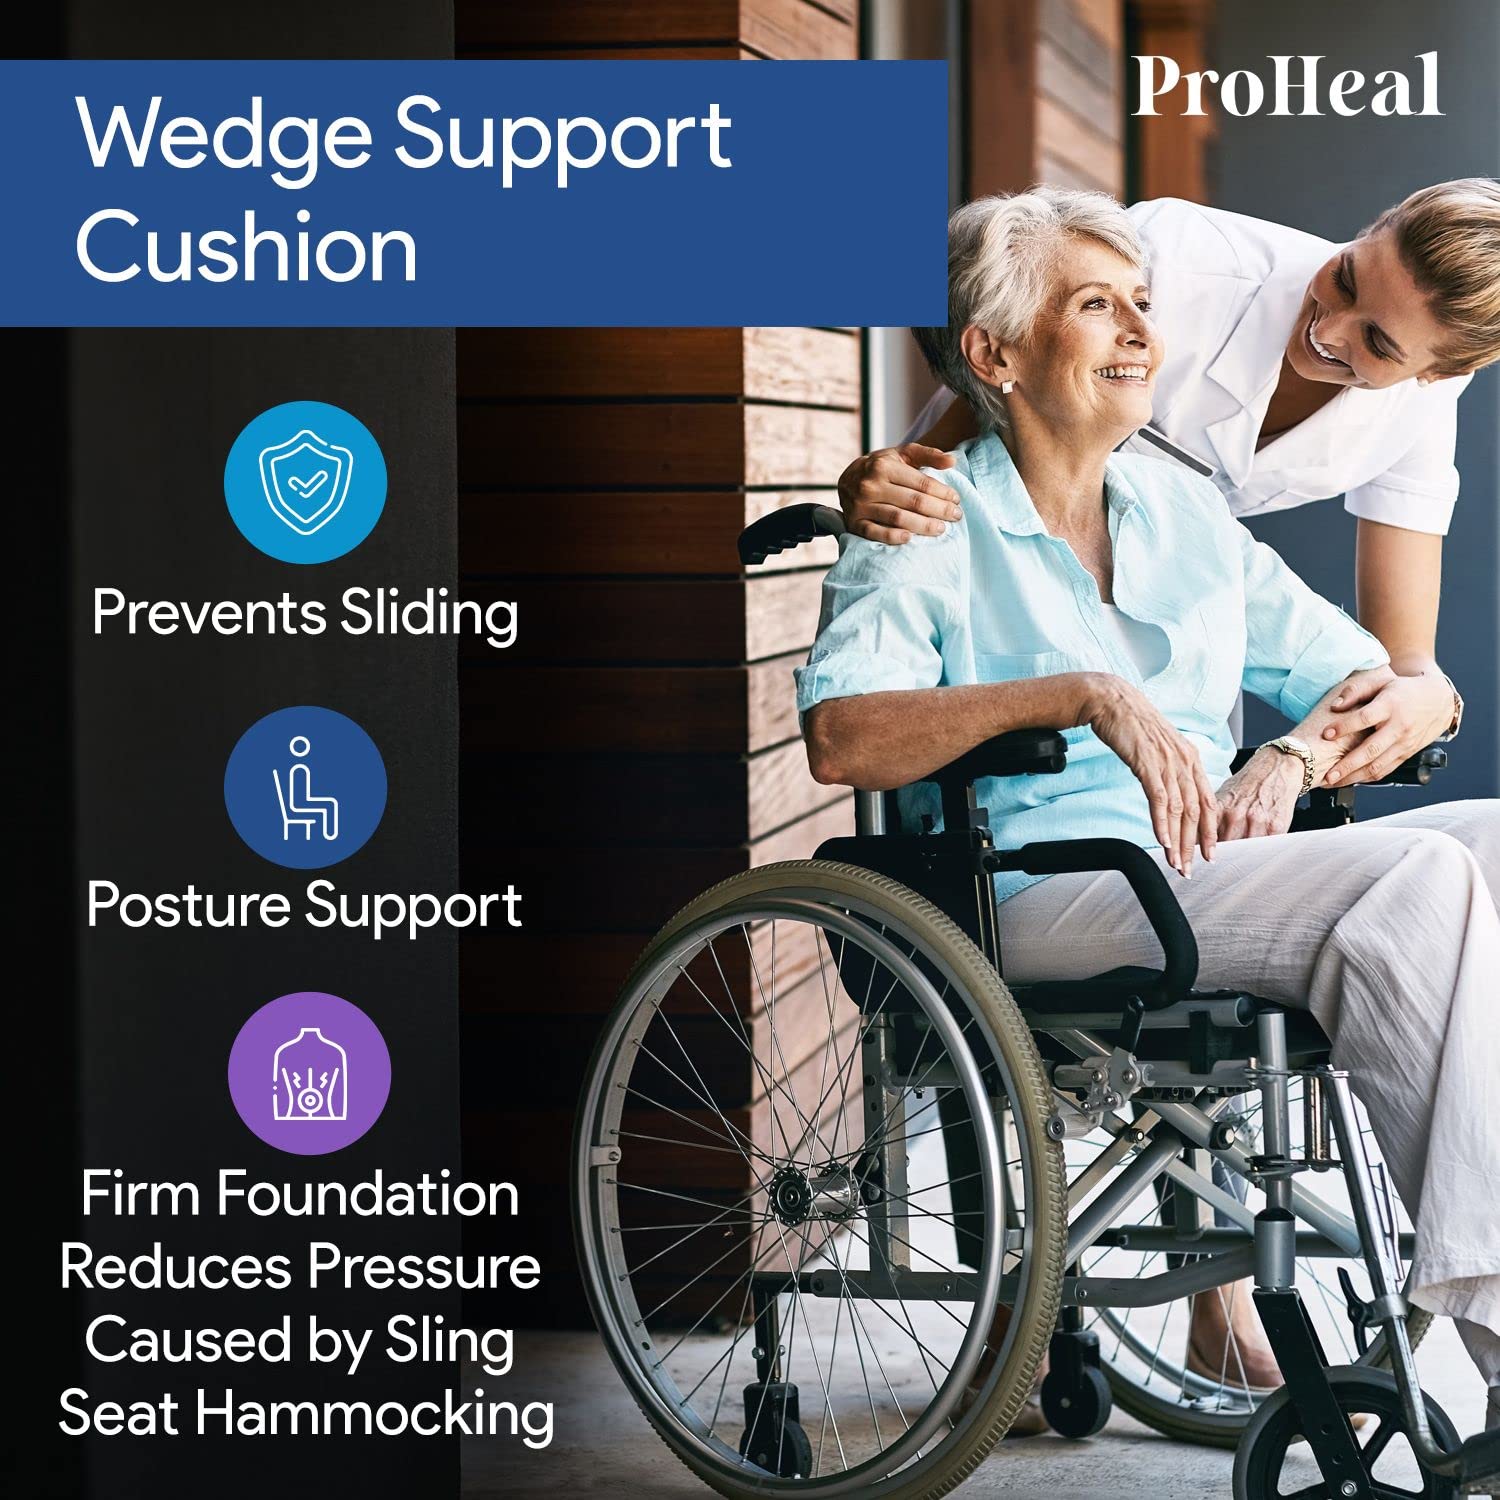 Gel Wedge Seat Cushion with Pommel, Bariatric - Better Posture and Hip Positioning - High Density Foam and Pressure Redistribution Gel and Back, Tailbone, and Coccyx Support  - Like New